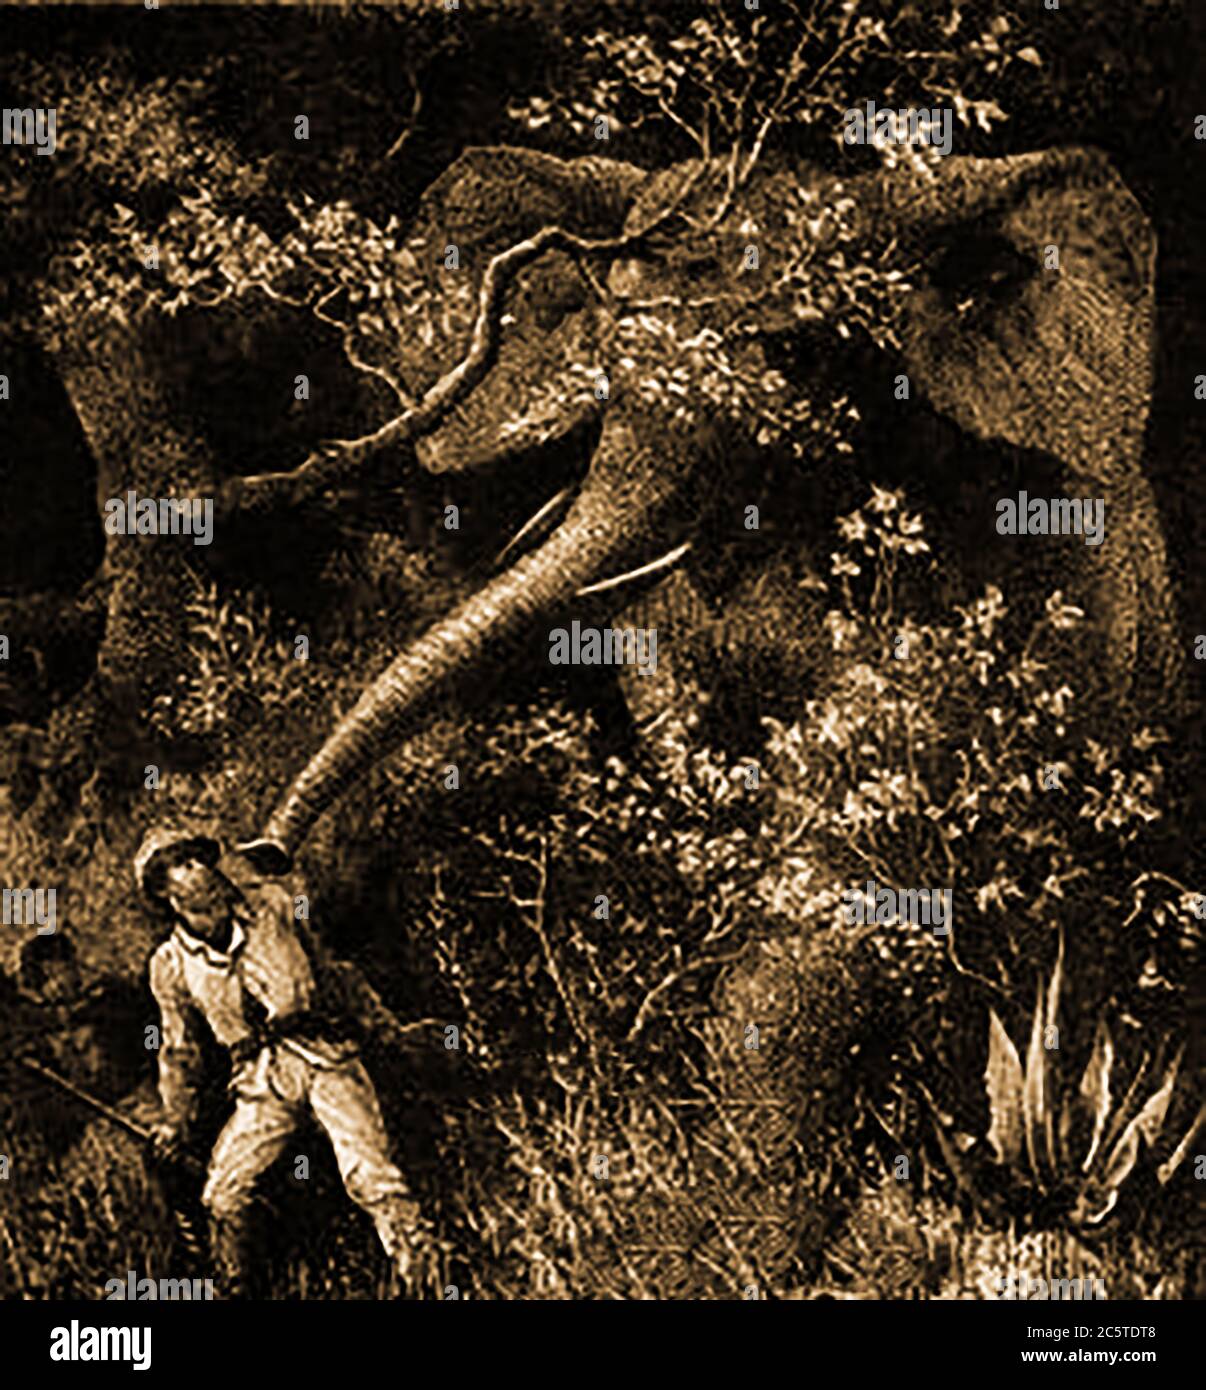 An 1880 illustration from the 'Illustrated Missionary News'. The magazine was formerly published under the title  The Pictorial missionary news edited by Henry Grattan Guinness (1835  - 1910) who was an Irish Protestant Christian preacher, evangelist and author (and others). This picture shows a missionary being attacked by a wild elephant. Stock Photo